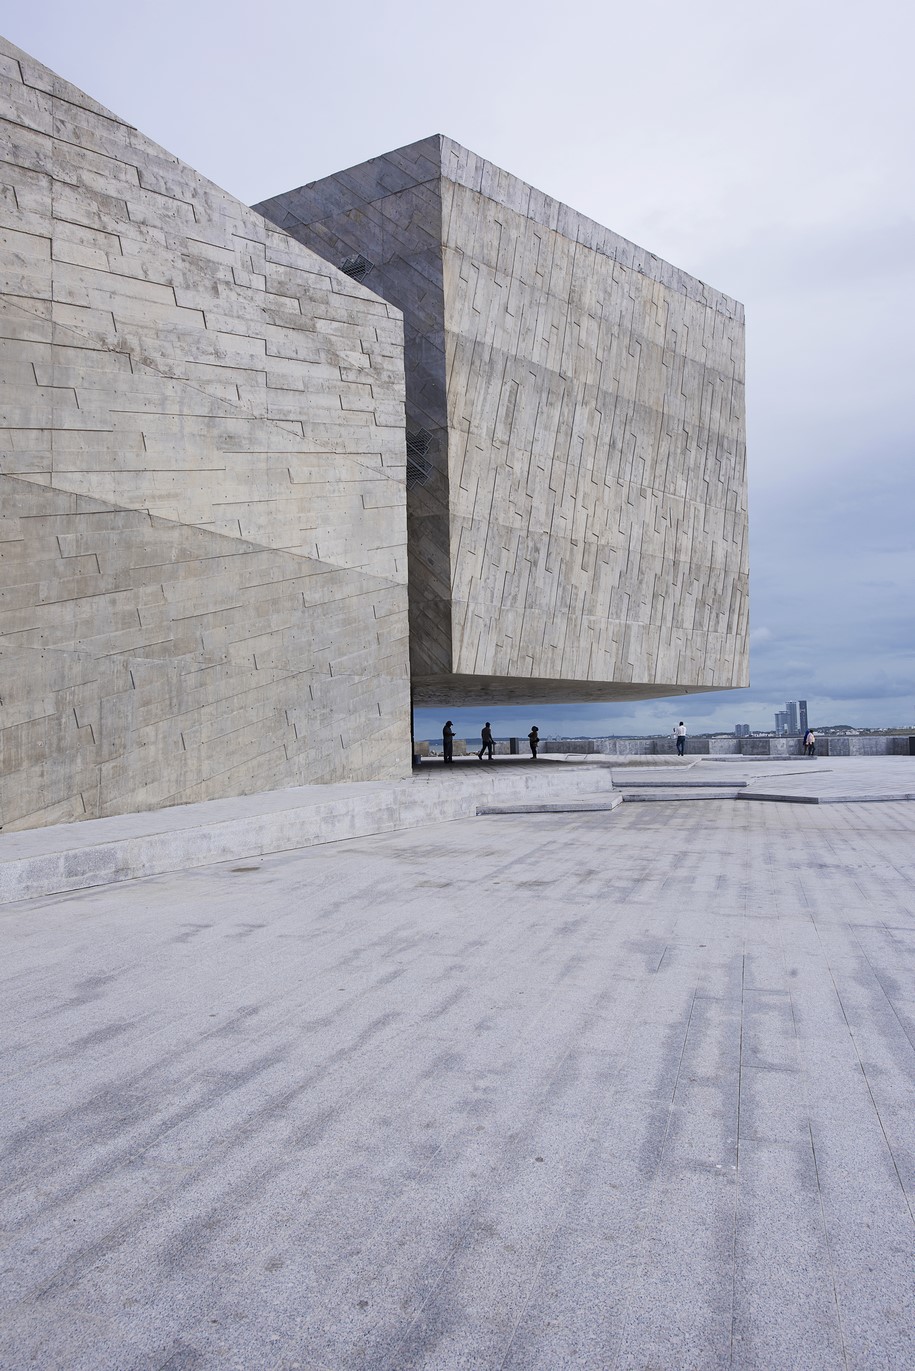 Archisearch Foro Boca re-interprets the timeless expression of the concrete cubes formed by ripraps in the breakwater